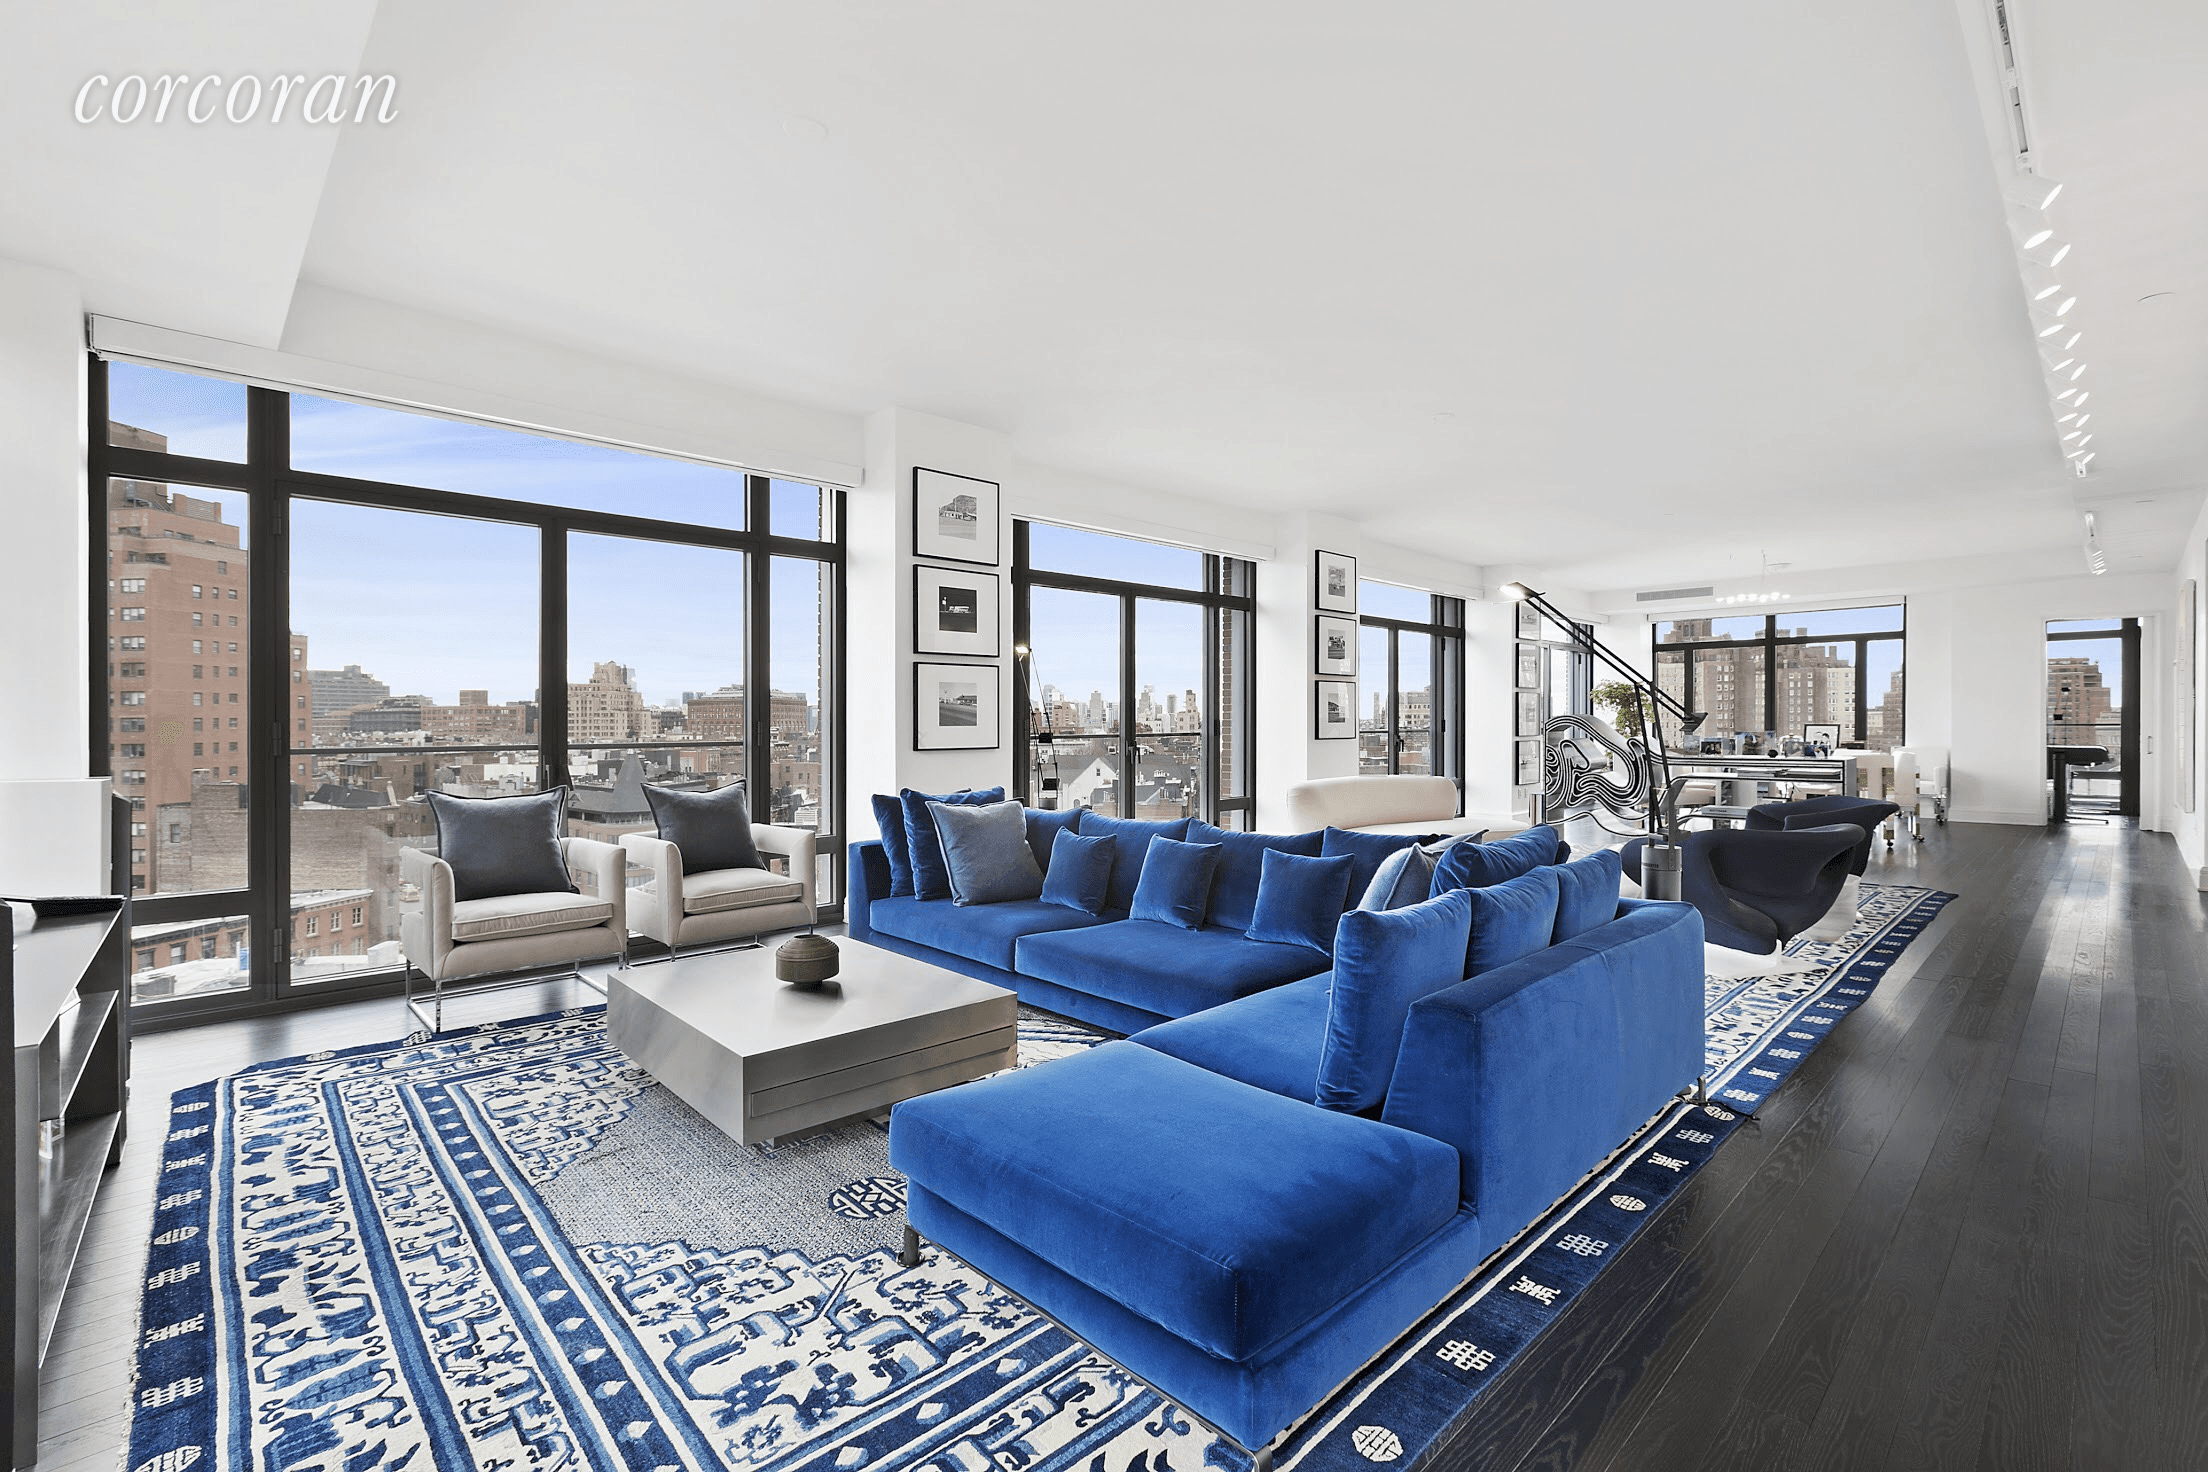 Residence 8A 155 West 11th StreetRare Opportunity at Greenwich LaneThree Bedrooms Three Baths Powder Room 3, 965 sqft indoor 1264 sqft private outdoor space This expansive 8th floor residence at ...